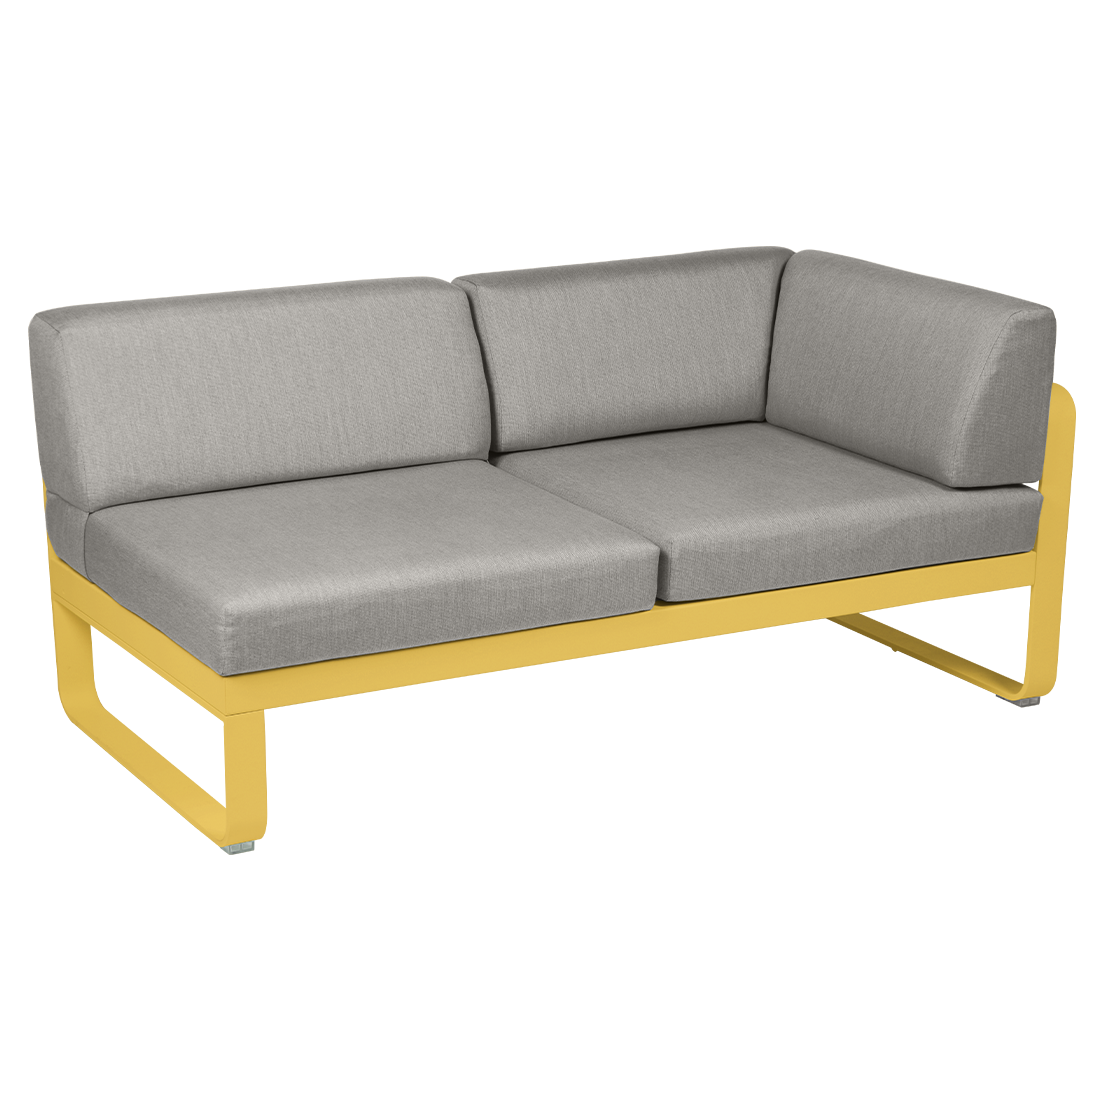 2-seater corner element BELLEVIE with side cushions - right